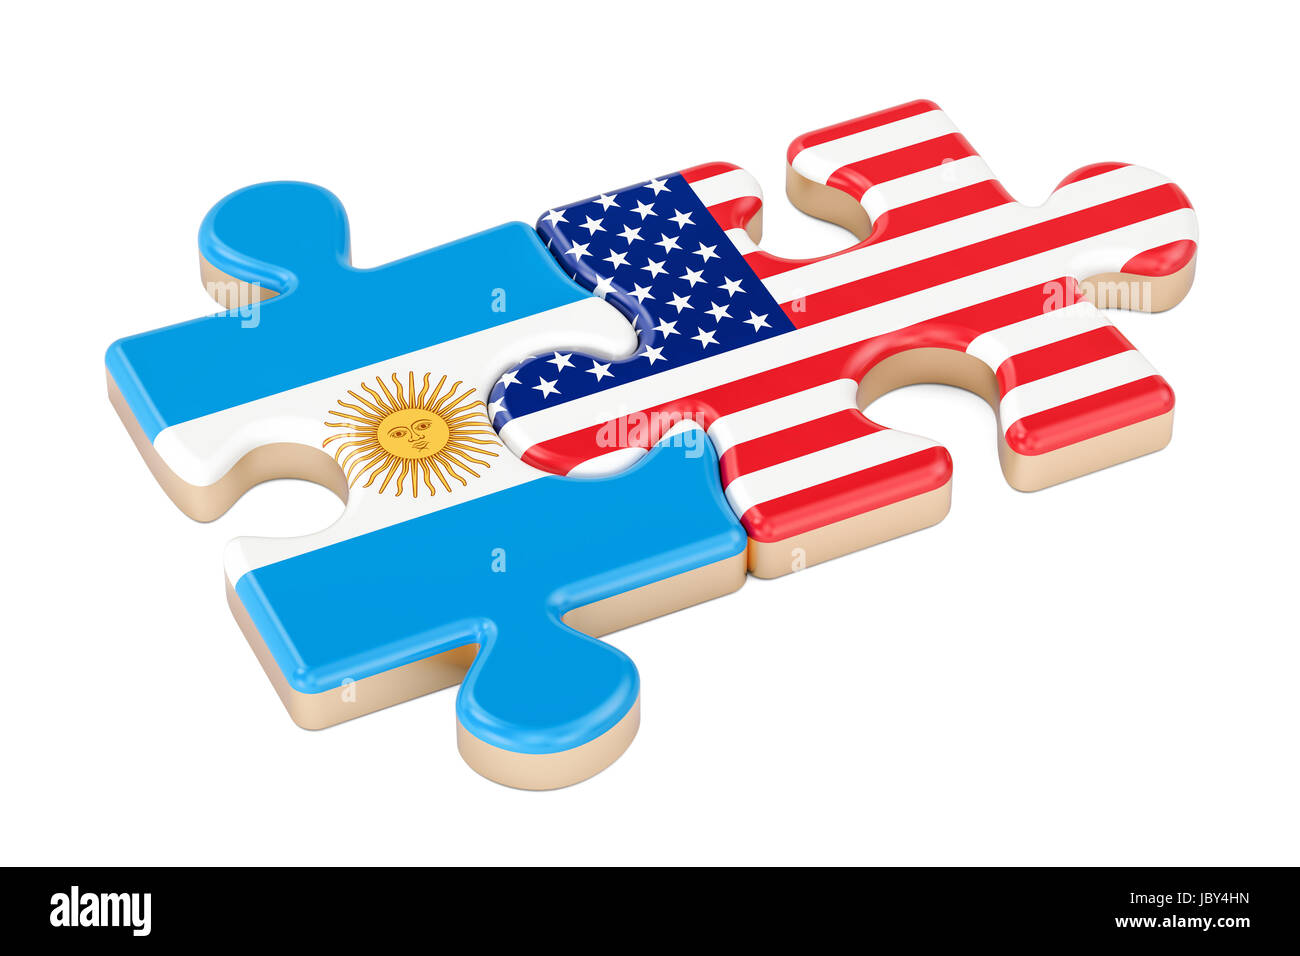 Argentina and USA puzzles from flags, 3D rendering isolated on white background Stock Photo